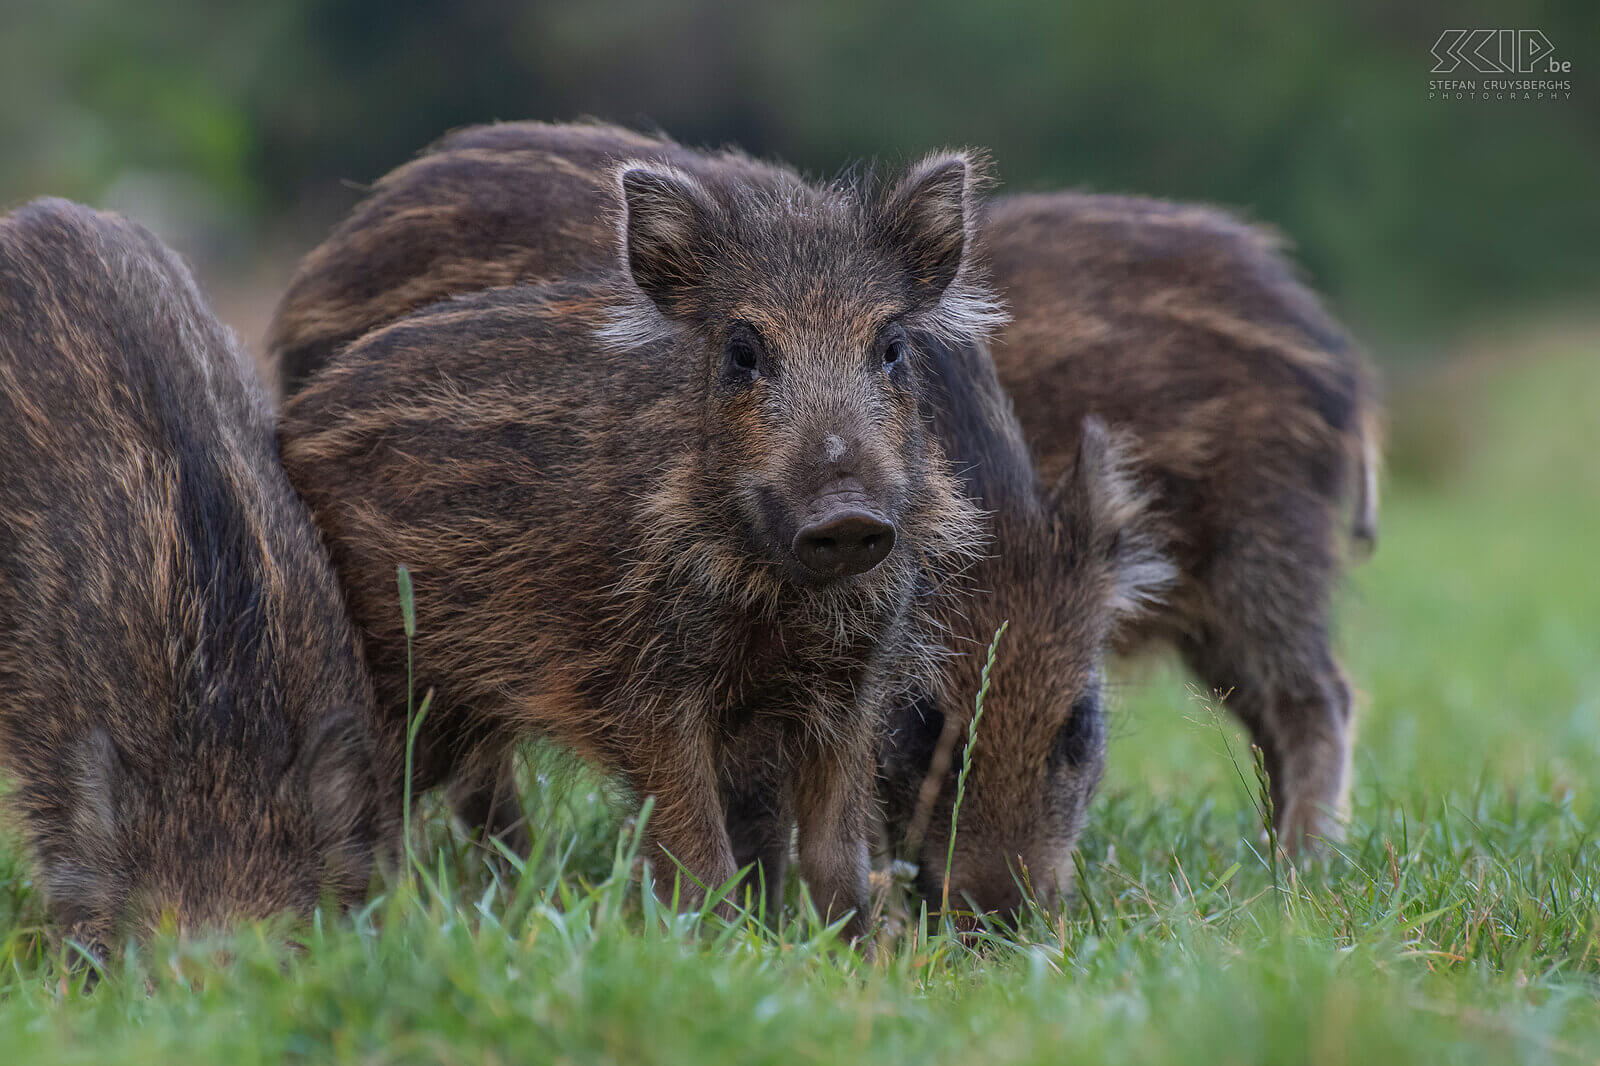 Juvenile wild boars Closeup of some young piglets with their typical pajamas with lighter stripes. Stefan Cruysberghs